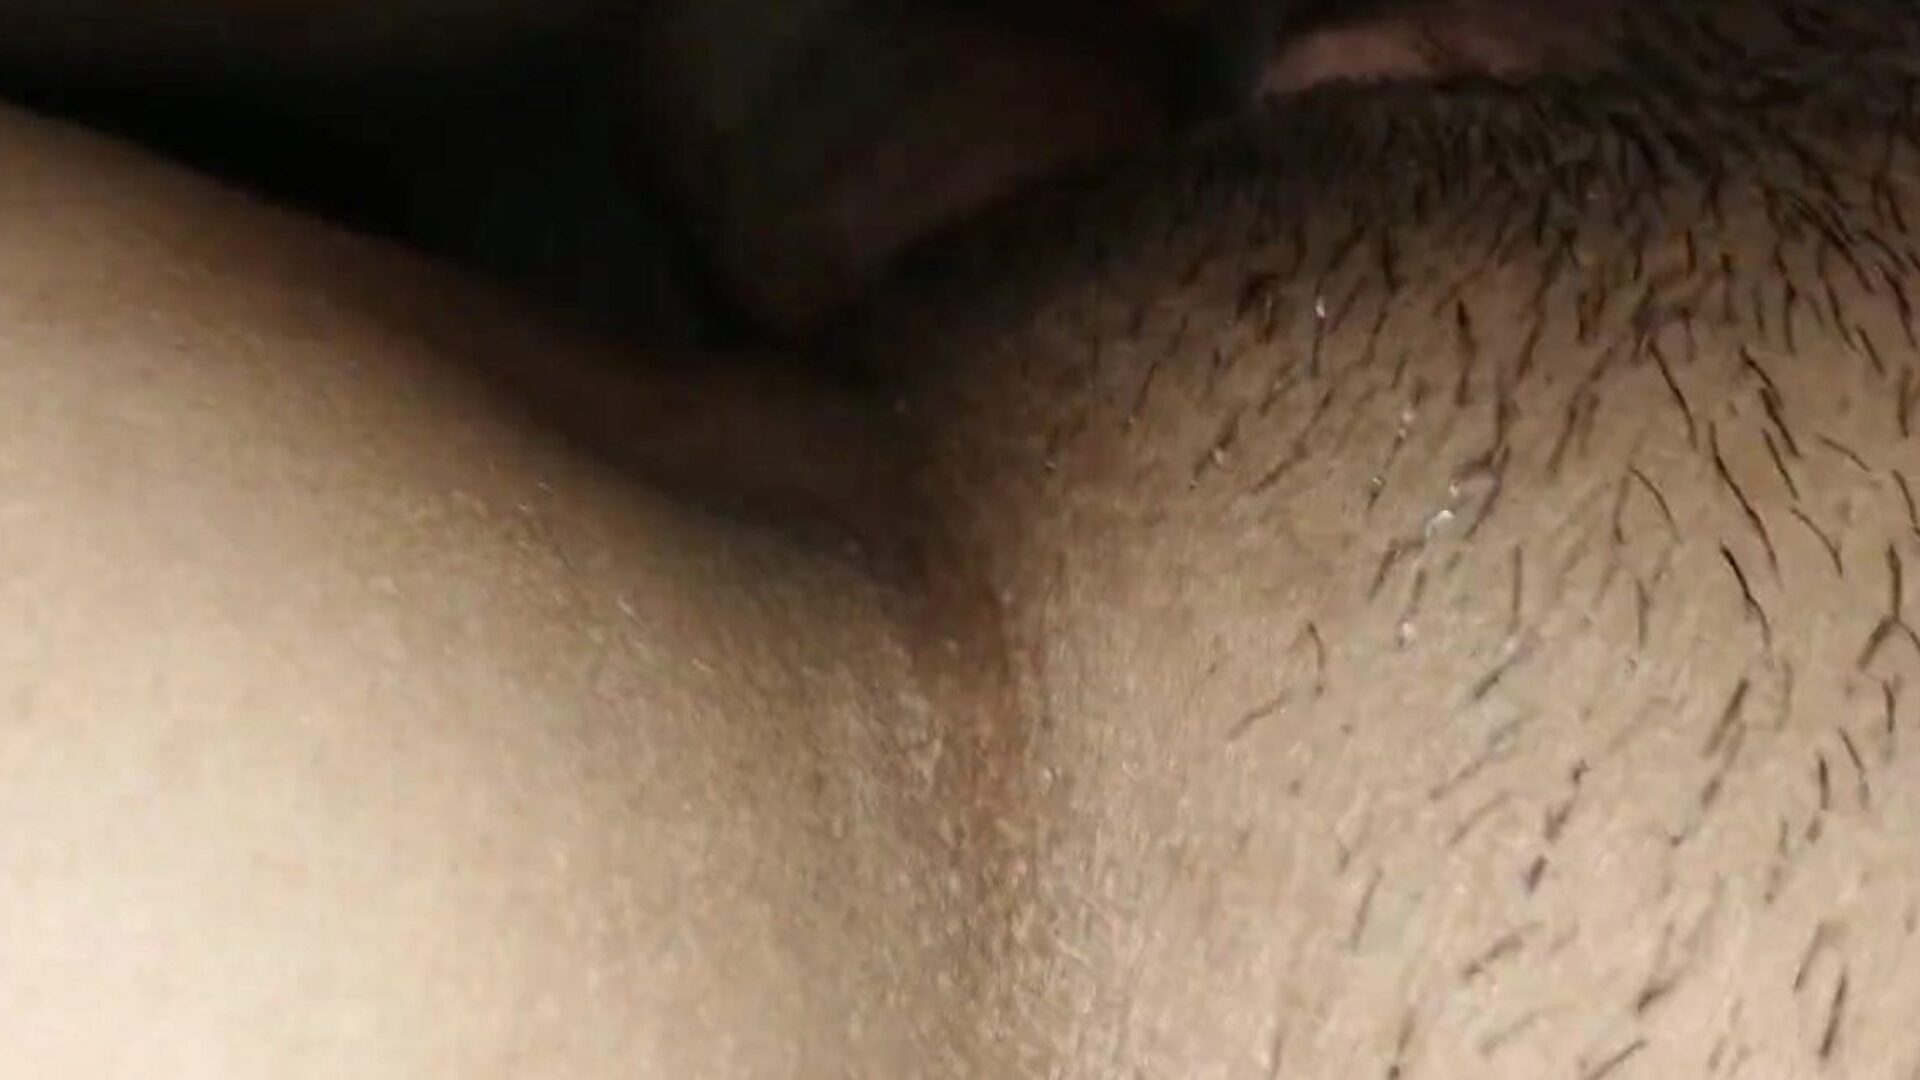 Close up My Wife Pussy, Free GF Pussy HD Porn 41: xHamster Watch Close up My Wife Pussy episode on xHamster, the finest HD fuckfest tube site with tons of free Malaysian Asian & GF Pussy porn vids